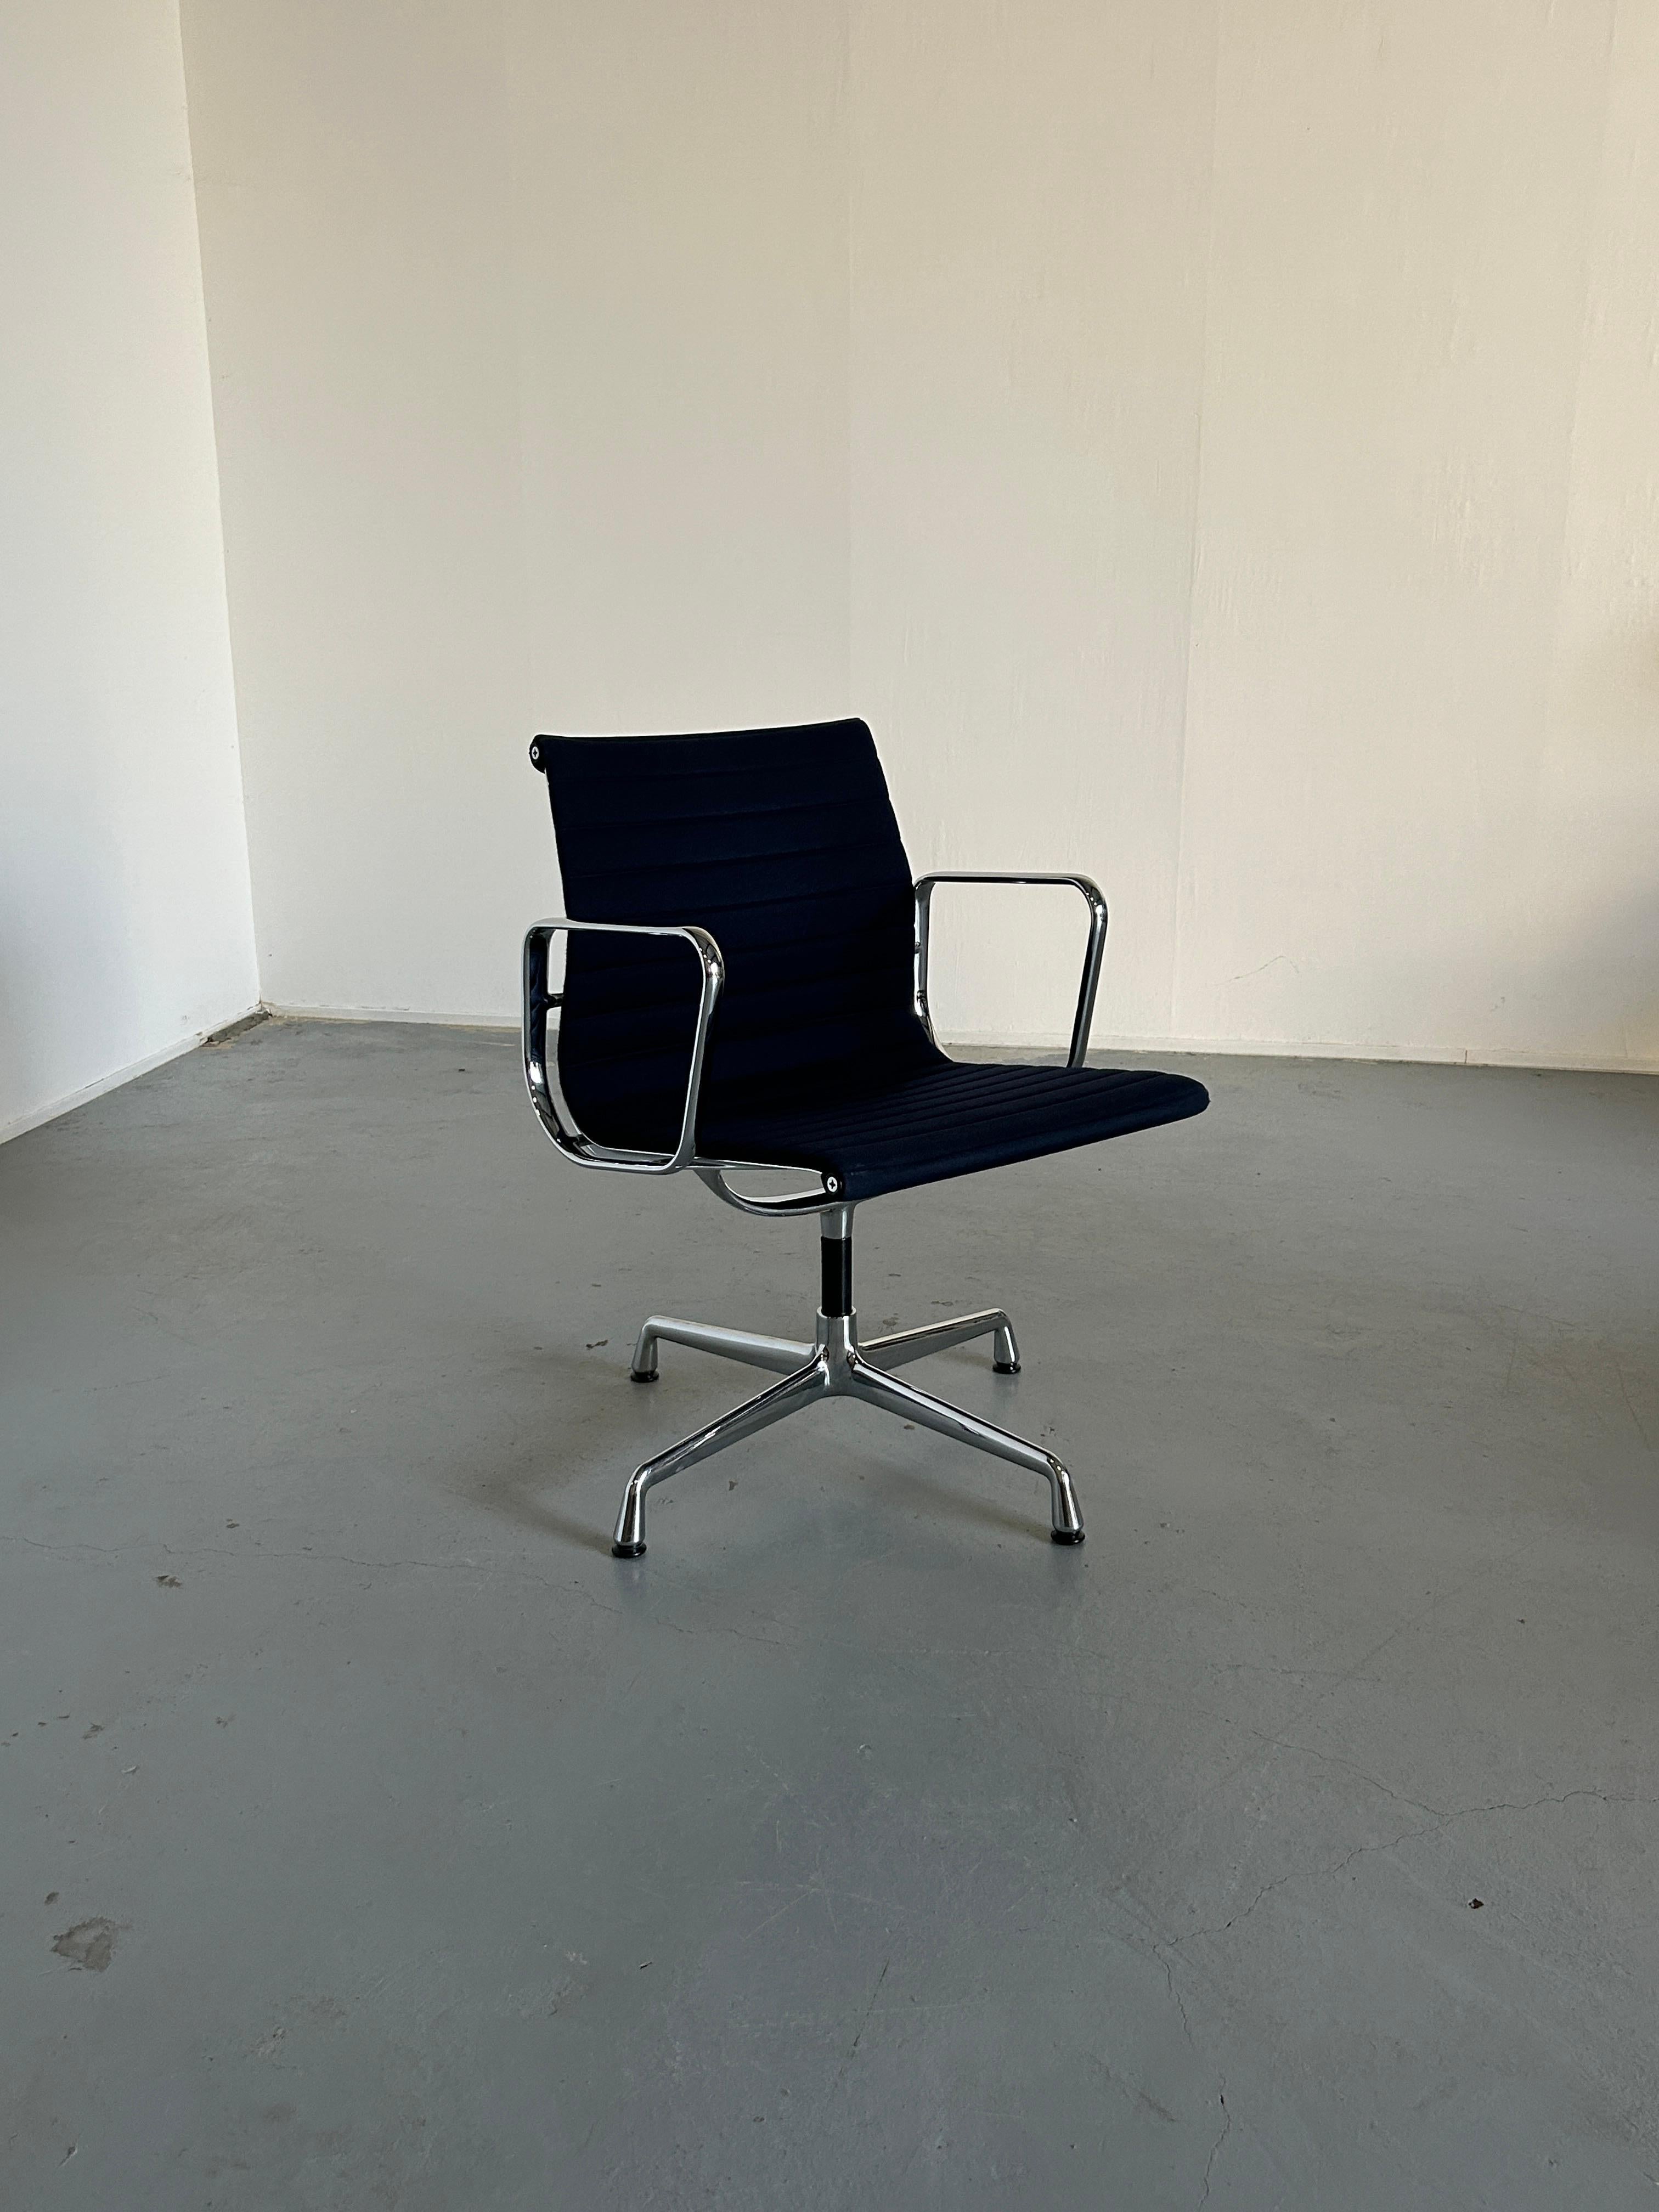 A vintage original Aluminium EA108 chairs designed by Charles and Ray Eames in 1958.
Chromed-plated aluminium base and blue net-weave seat with swivel mechanism. Vitra edition, signed.
Exceptional production quality.

Produced in the year of 1990.